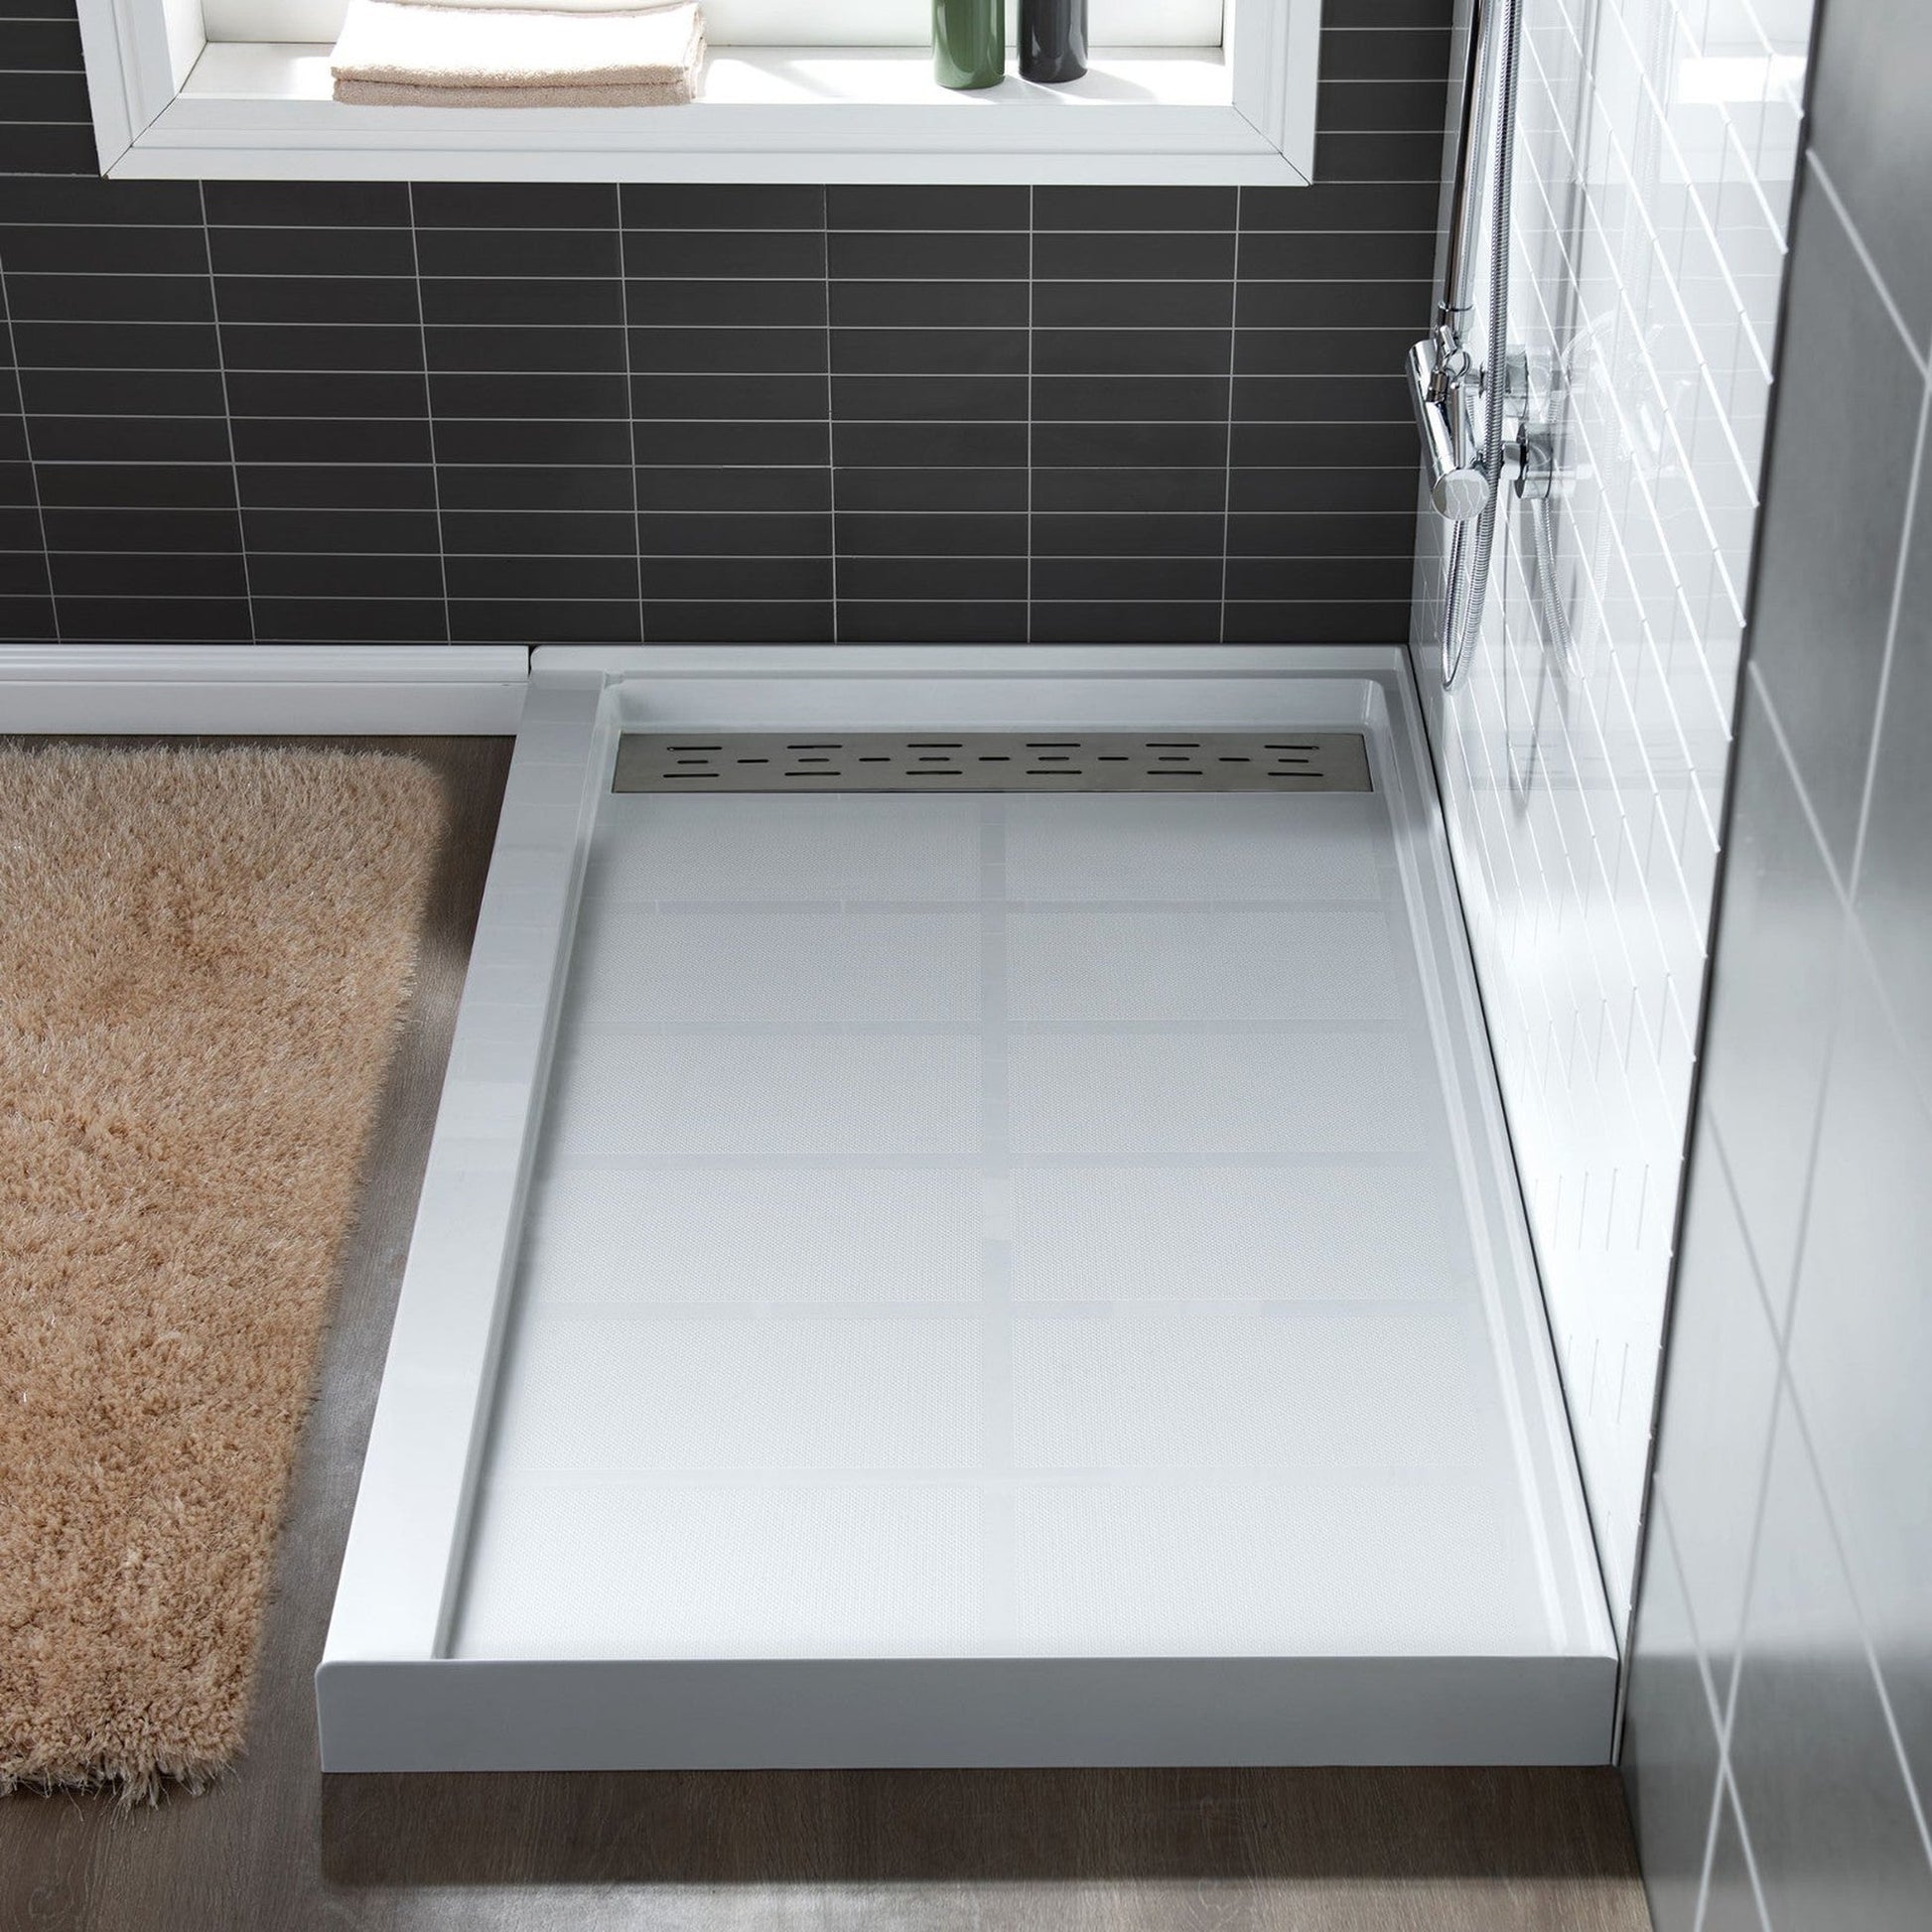 WoodBridge 48" x 32" White Solid Surface Shower Base Left Drain Location With Brushed Nickel Trench Drain Cover